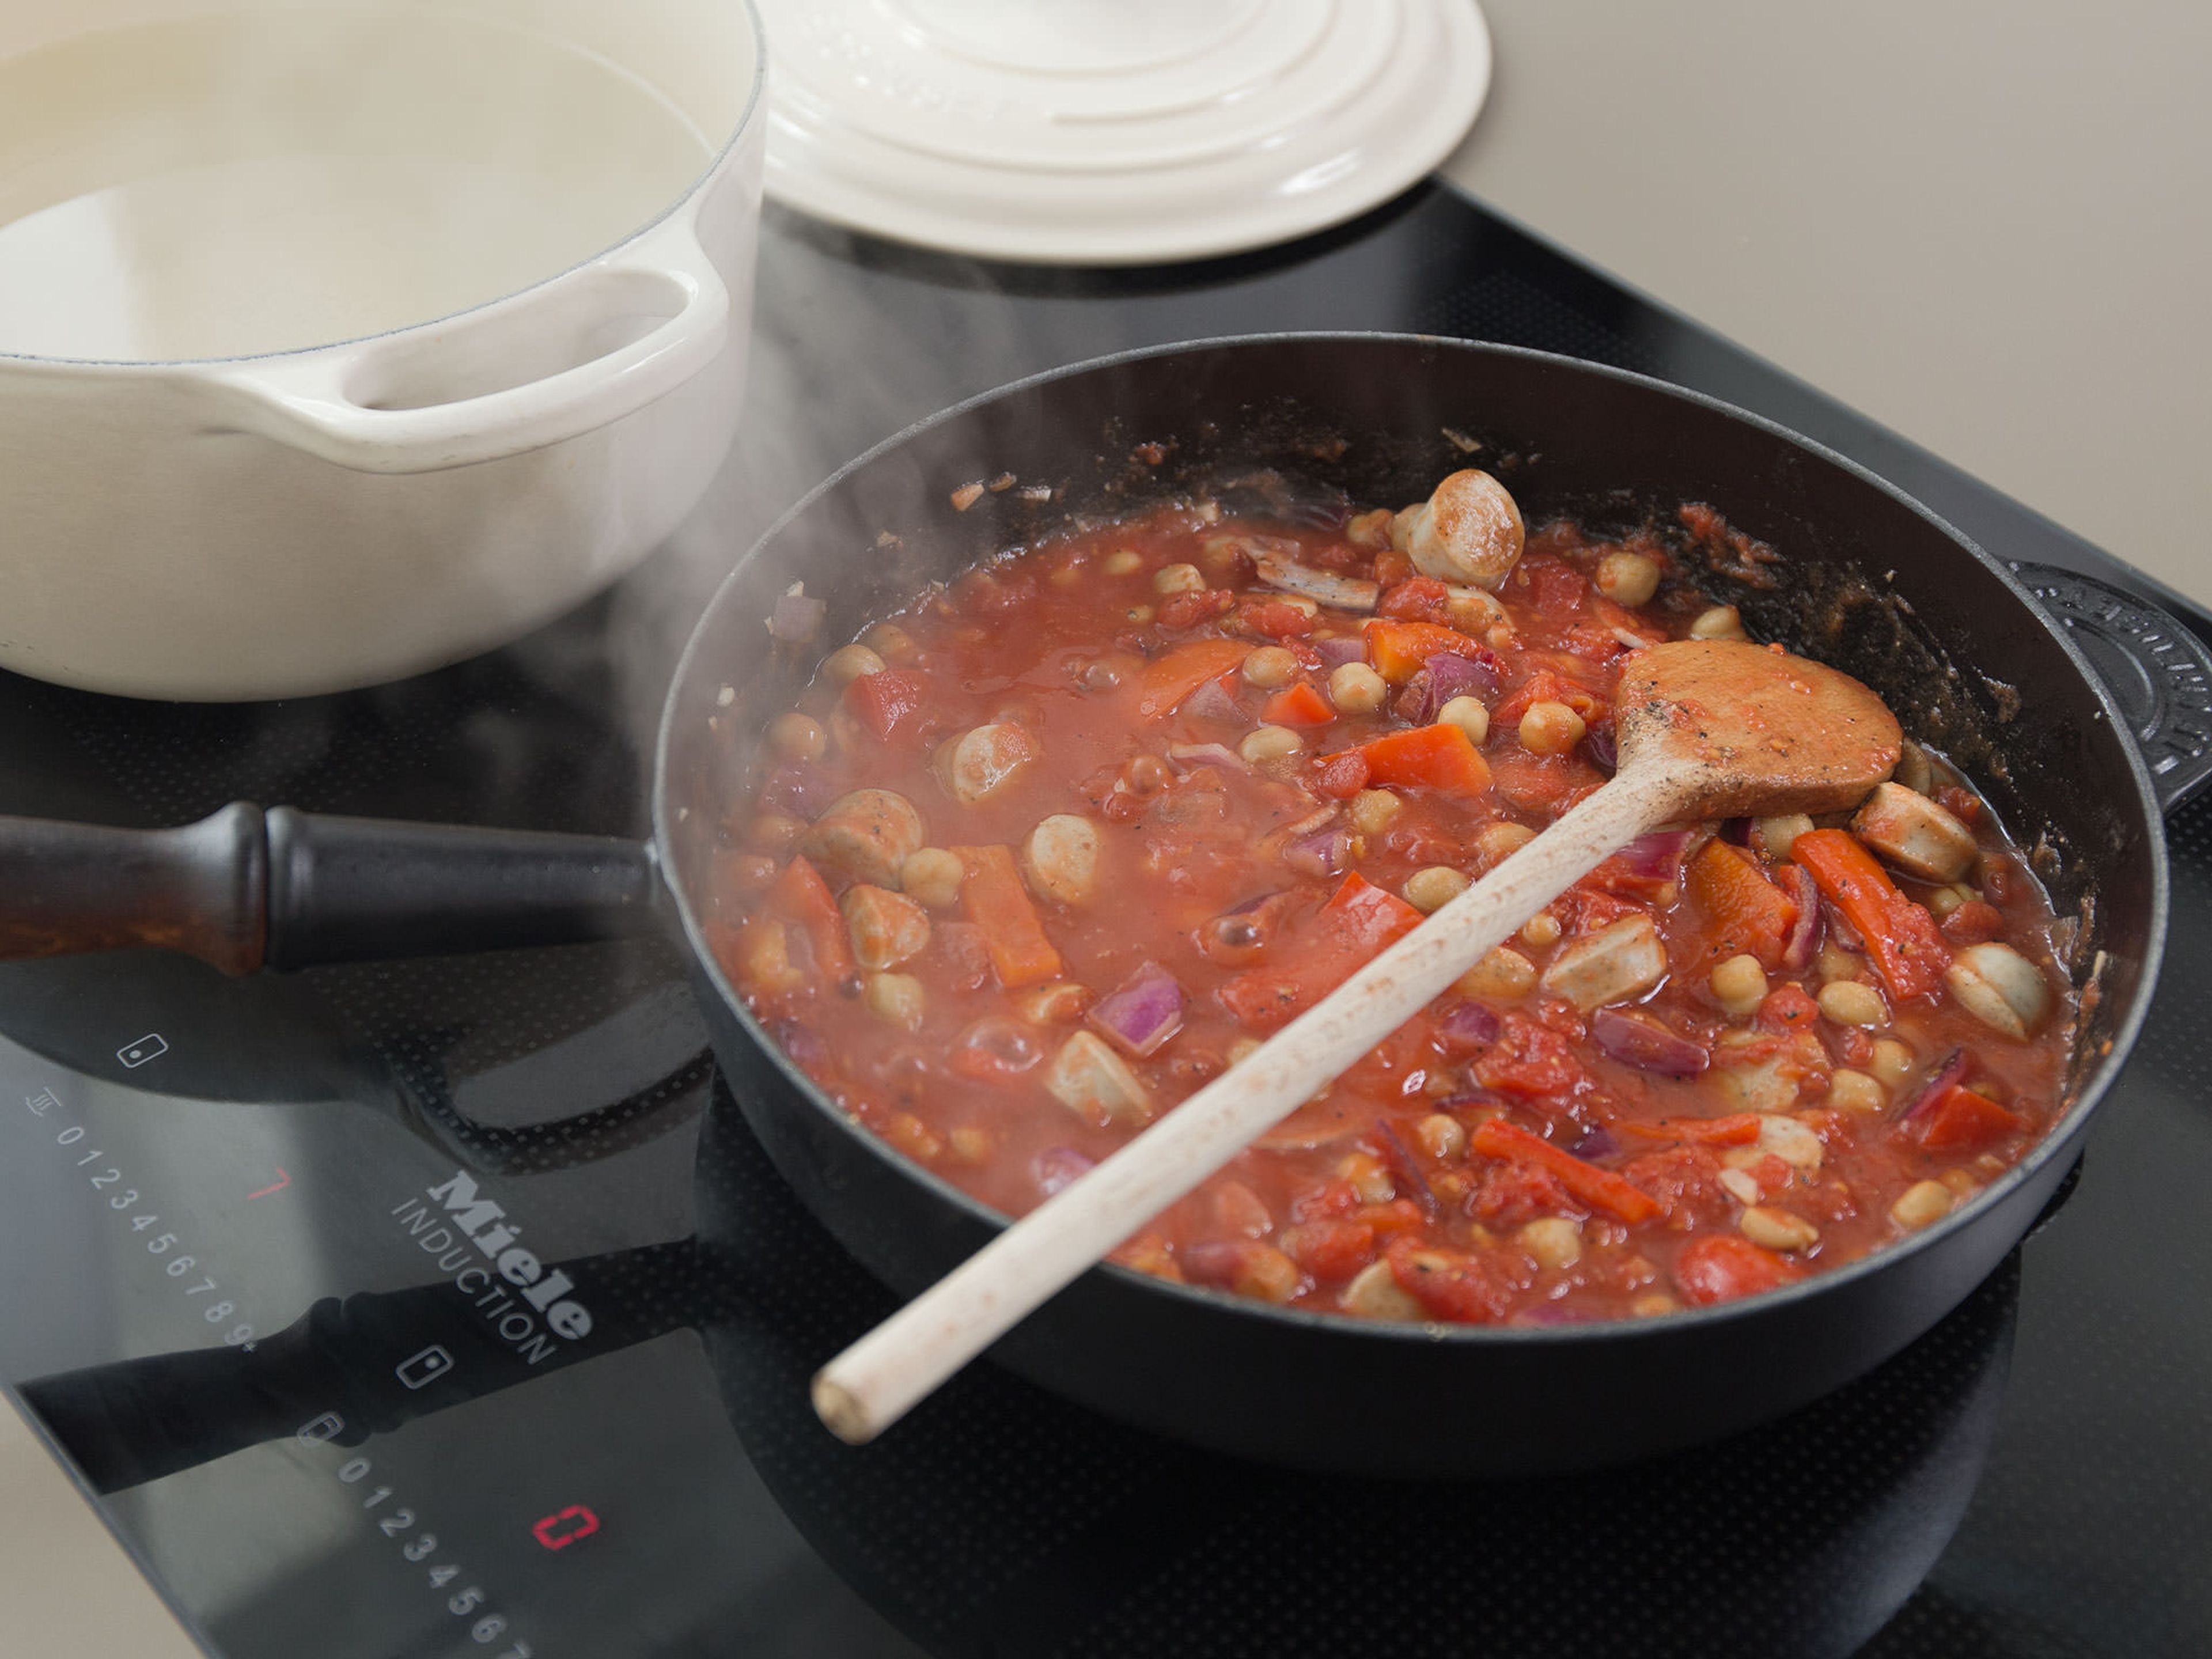 Add tomatoes and season with salt and pepper. Let simmer for approx. 10 – 15 min., uncovered. In the meantime, bring water to a boil in a large saucepan, add salt, and cook penne according to package instructions, until al dente.